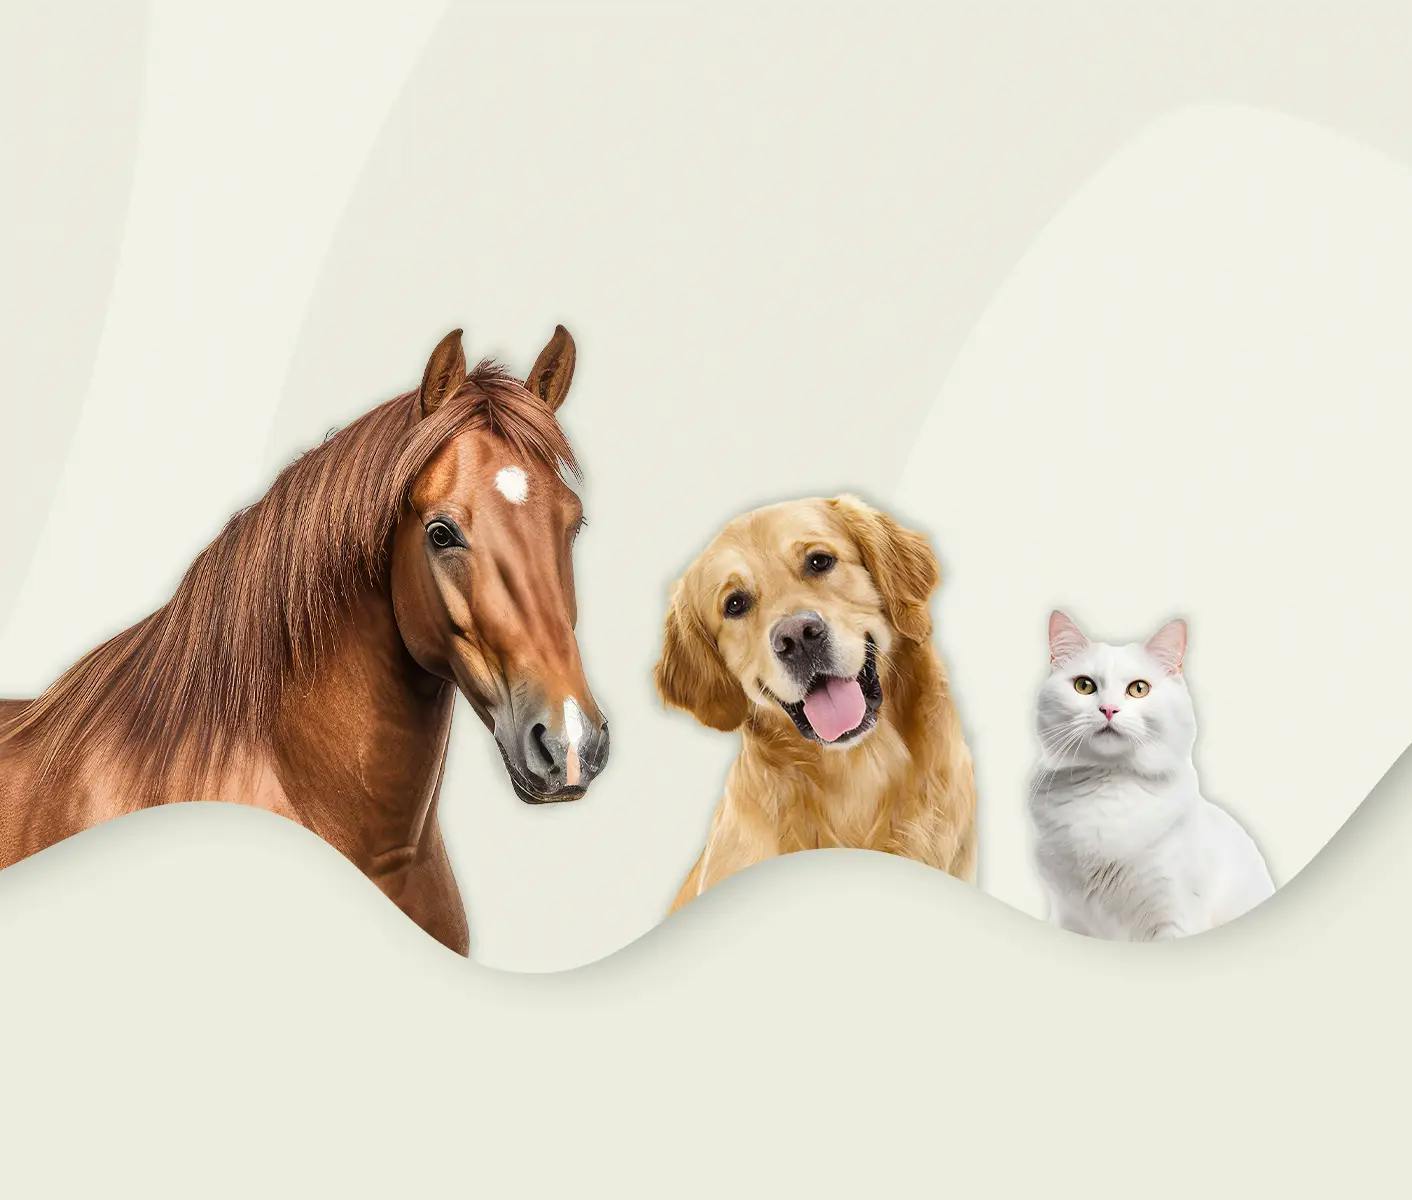 A horse, dog and a cat sitting next to each other in front of tan background